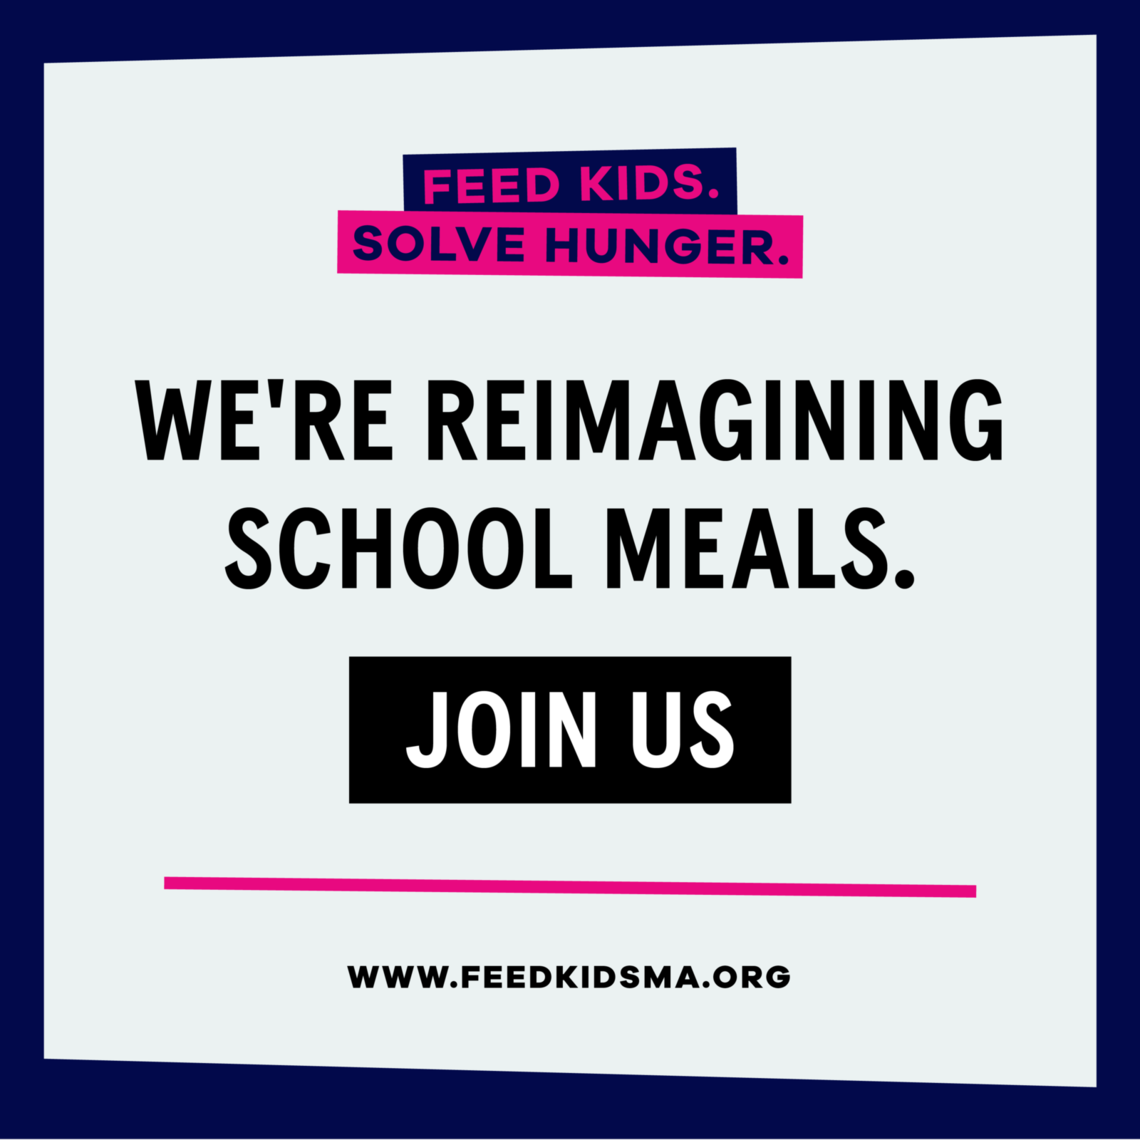 We're reimagining school meals. Join us on our Feed Kids Campaign